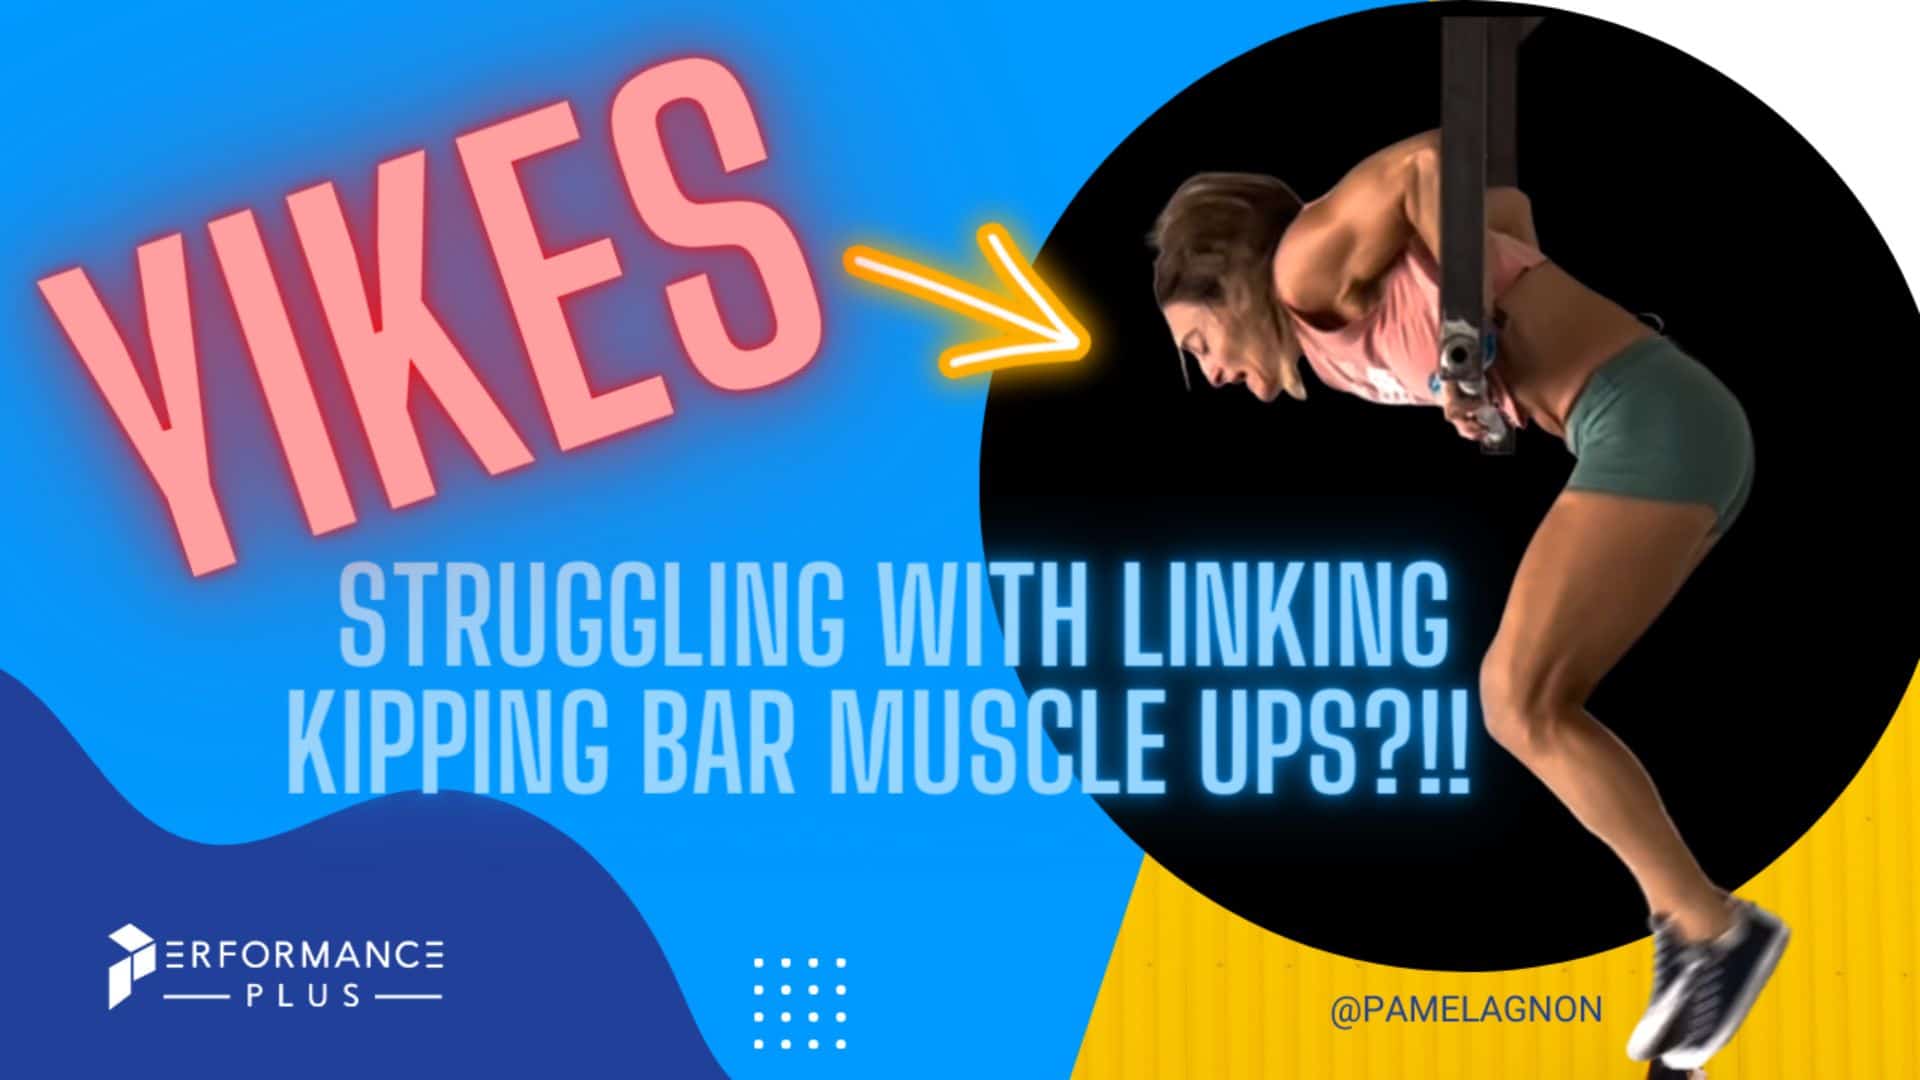 Featured image for “Linking Kipping Bar Muscle-Ups”